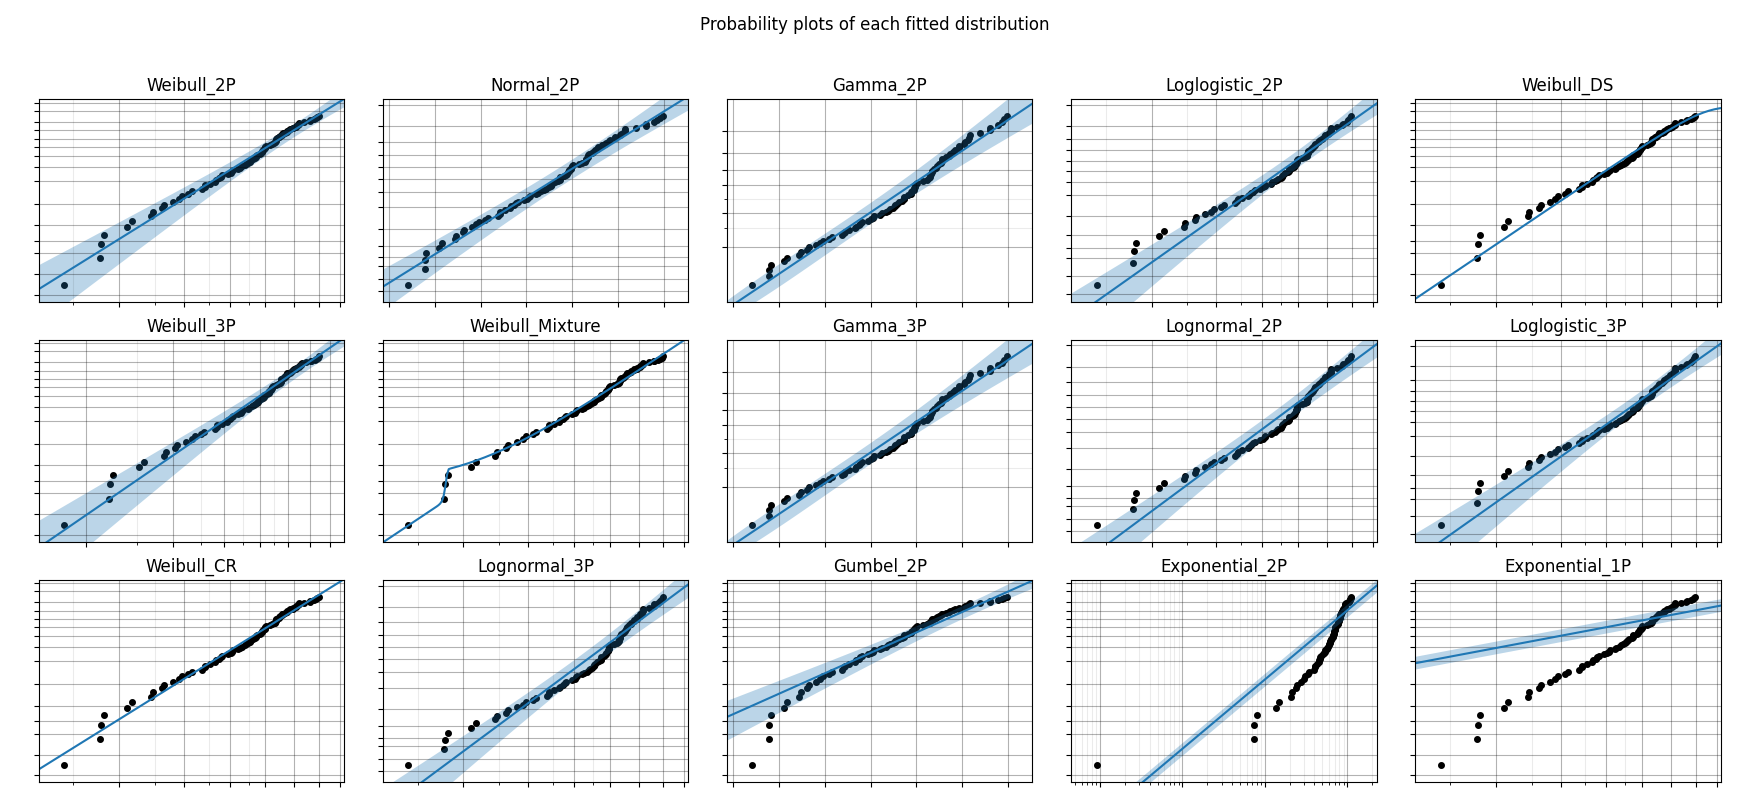 _images/Fit_everything_probability_plot_V7.png